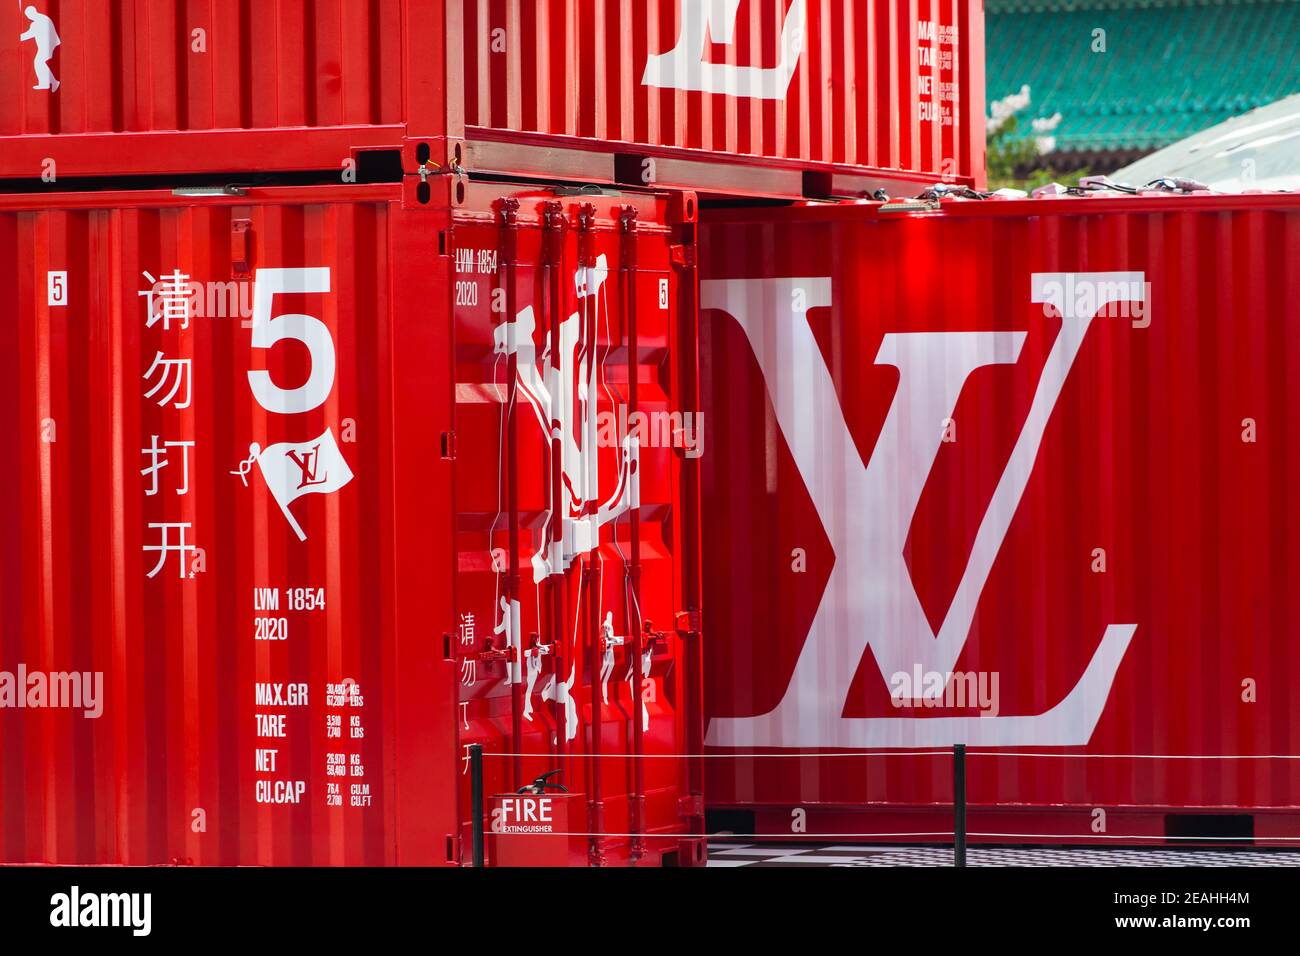 Louis Vuitton's pop-up installation of red striking shipping